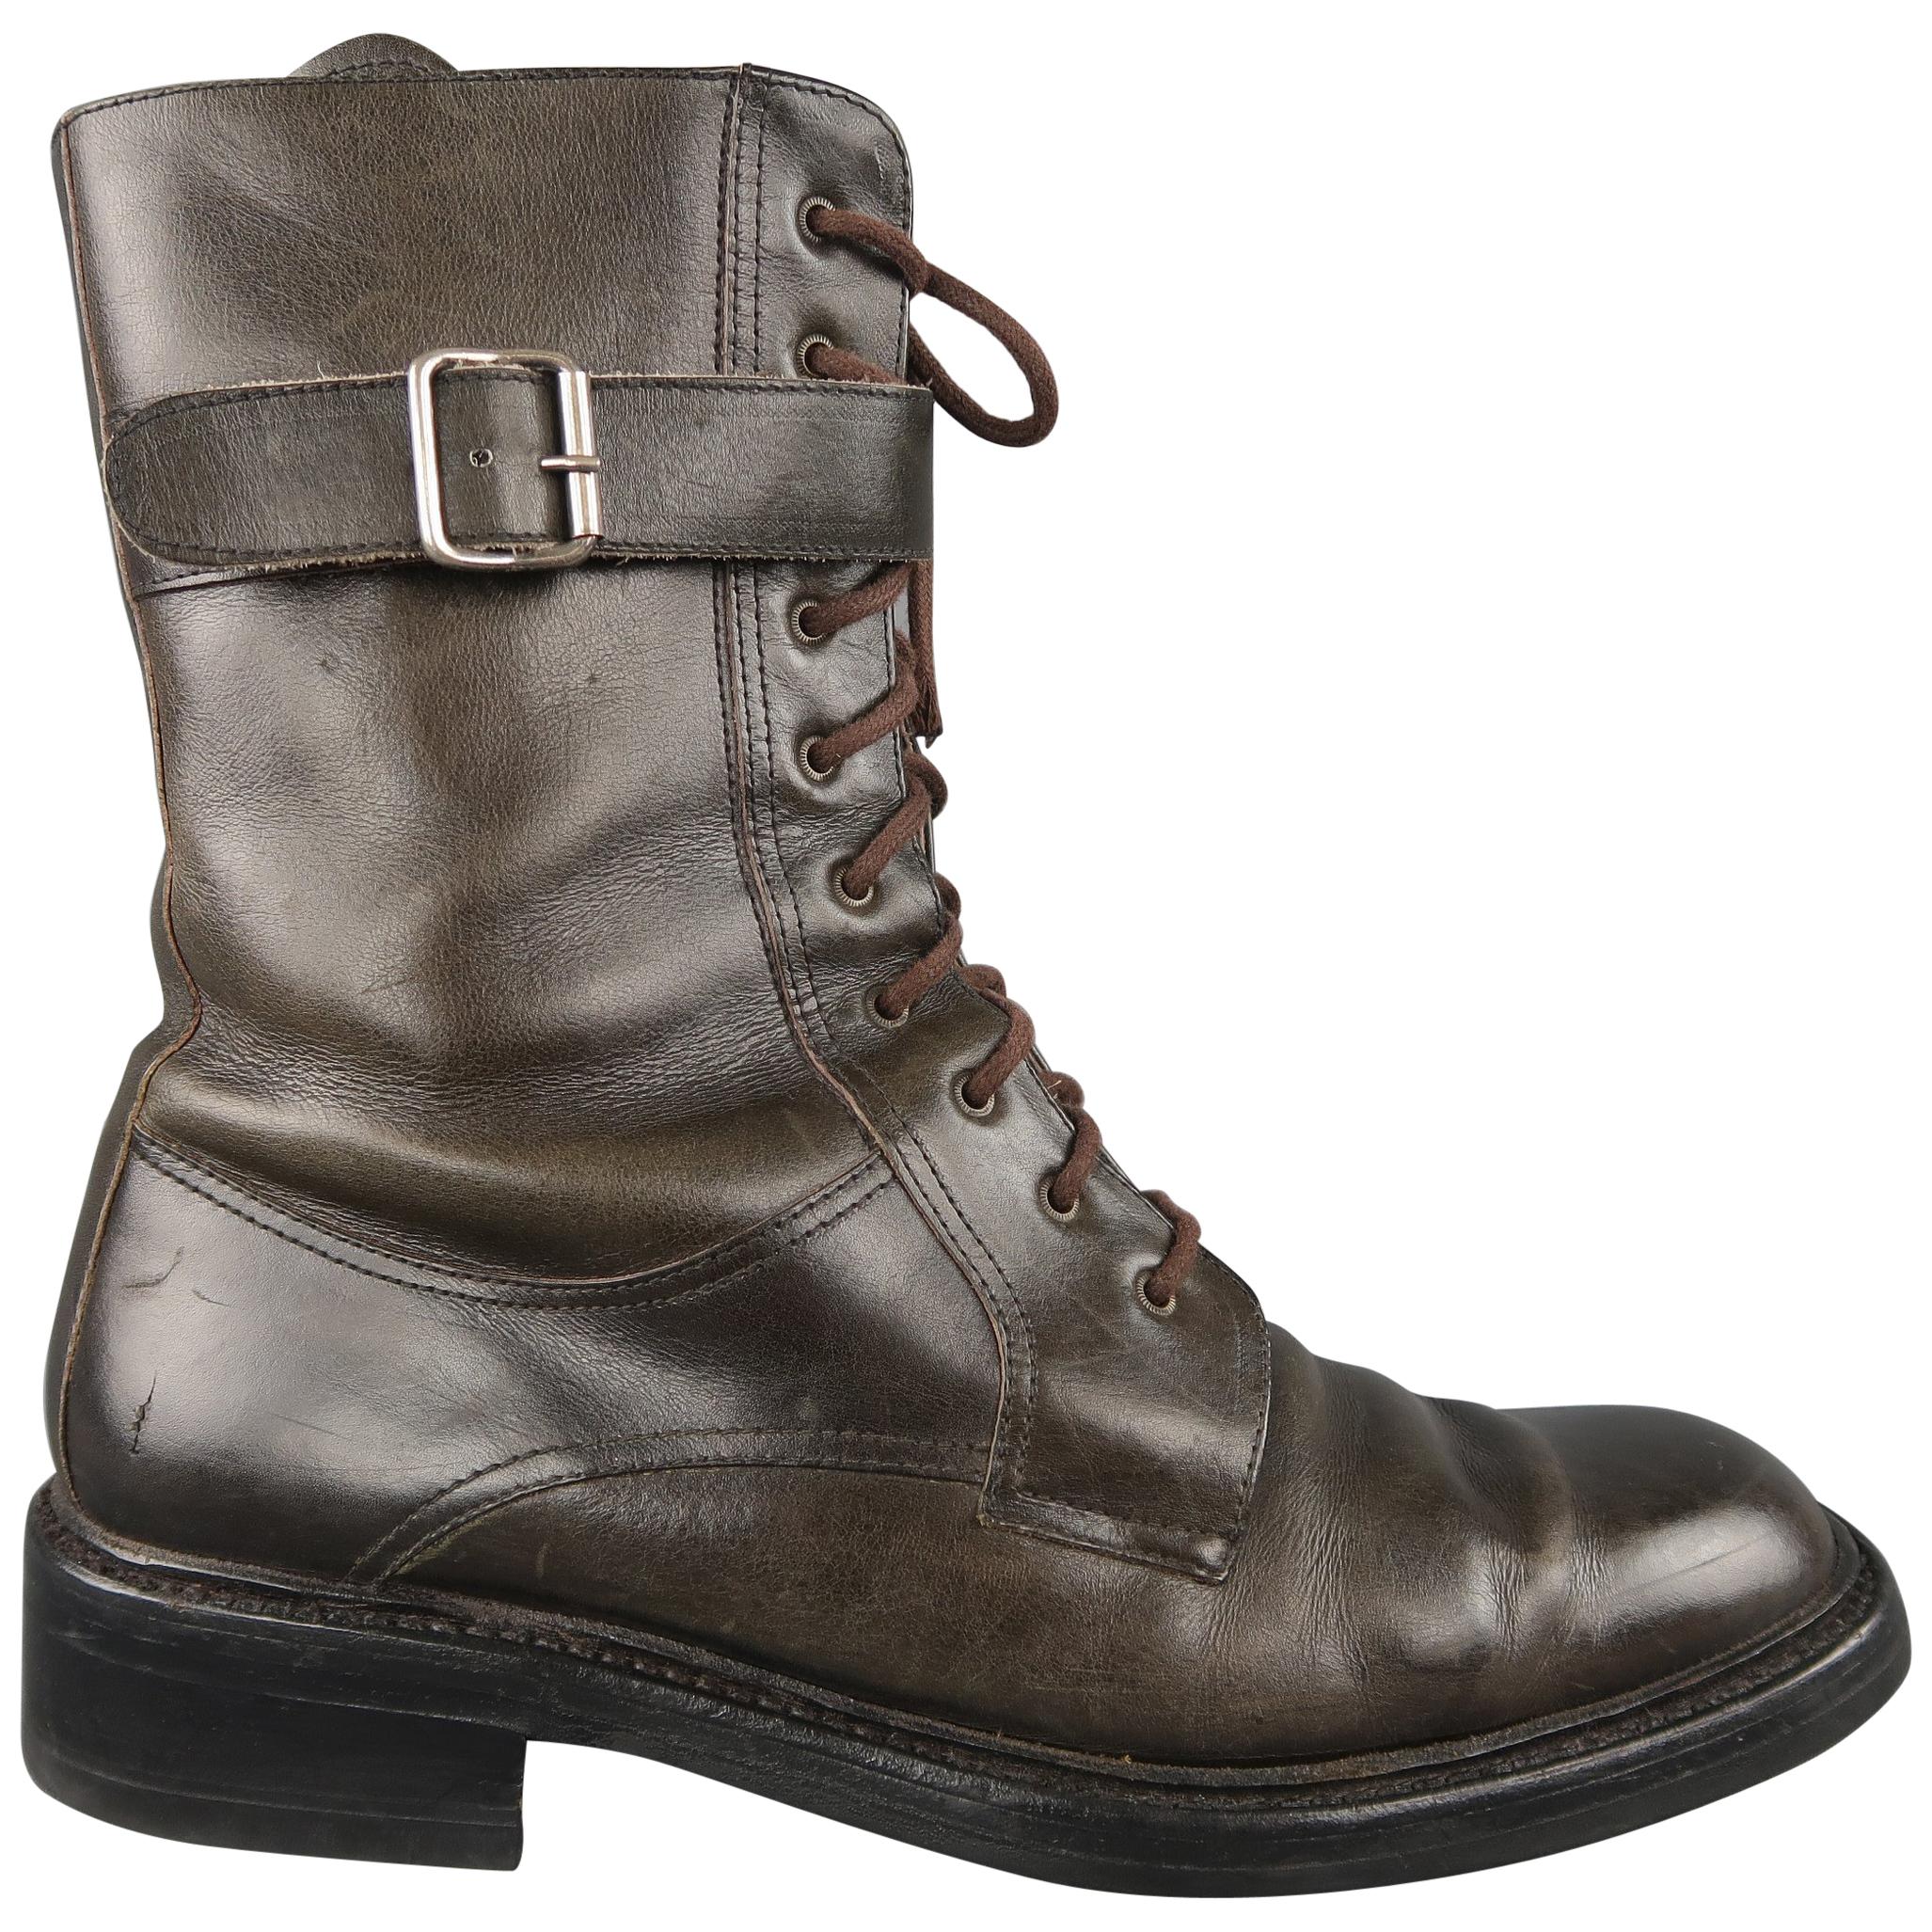 Prada Taupe Leather Ankle Strap Combat Boots / Shoes